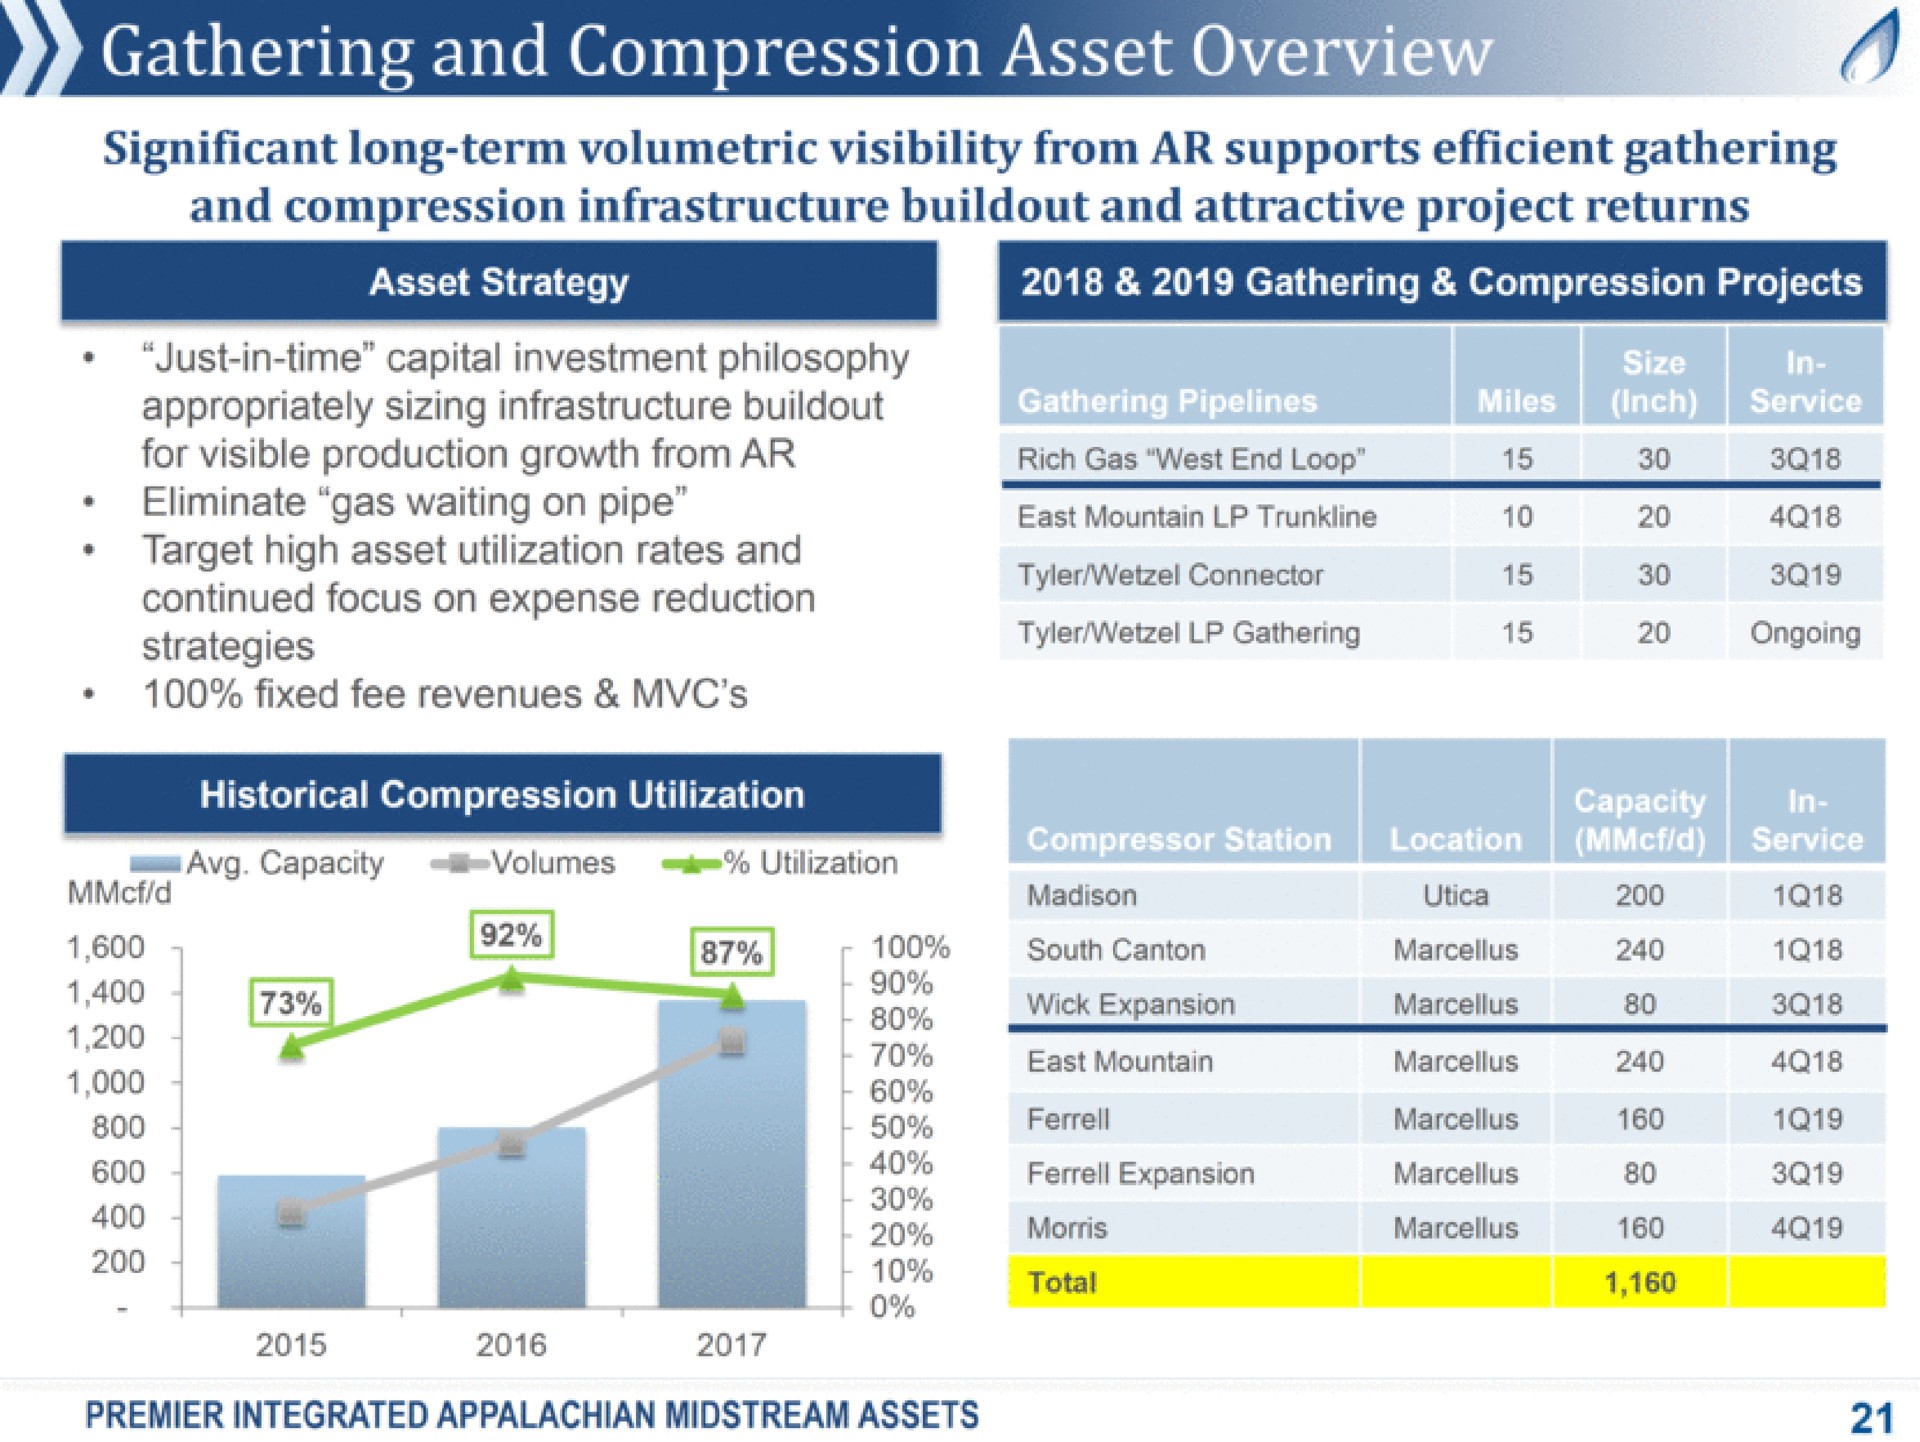 gathering and compression asset significant long term volumetric visibility from supports efficient gathering and compression infrastructure and attractive project returns asset strategy just in time capital investment philosophy appropriately sizing infrastructure for visible production growth from a a get on pipe rates an rates a asset continued focus on expense reduction strategi fixed fee revenues historical compression utilization capacity a volumes a utilization rich gas east mountain connector gathering ongoing am a a south canton wick expansion east mountain expansion morris total a pooh premier integrated midstream assets | Antero Midstream Partners